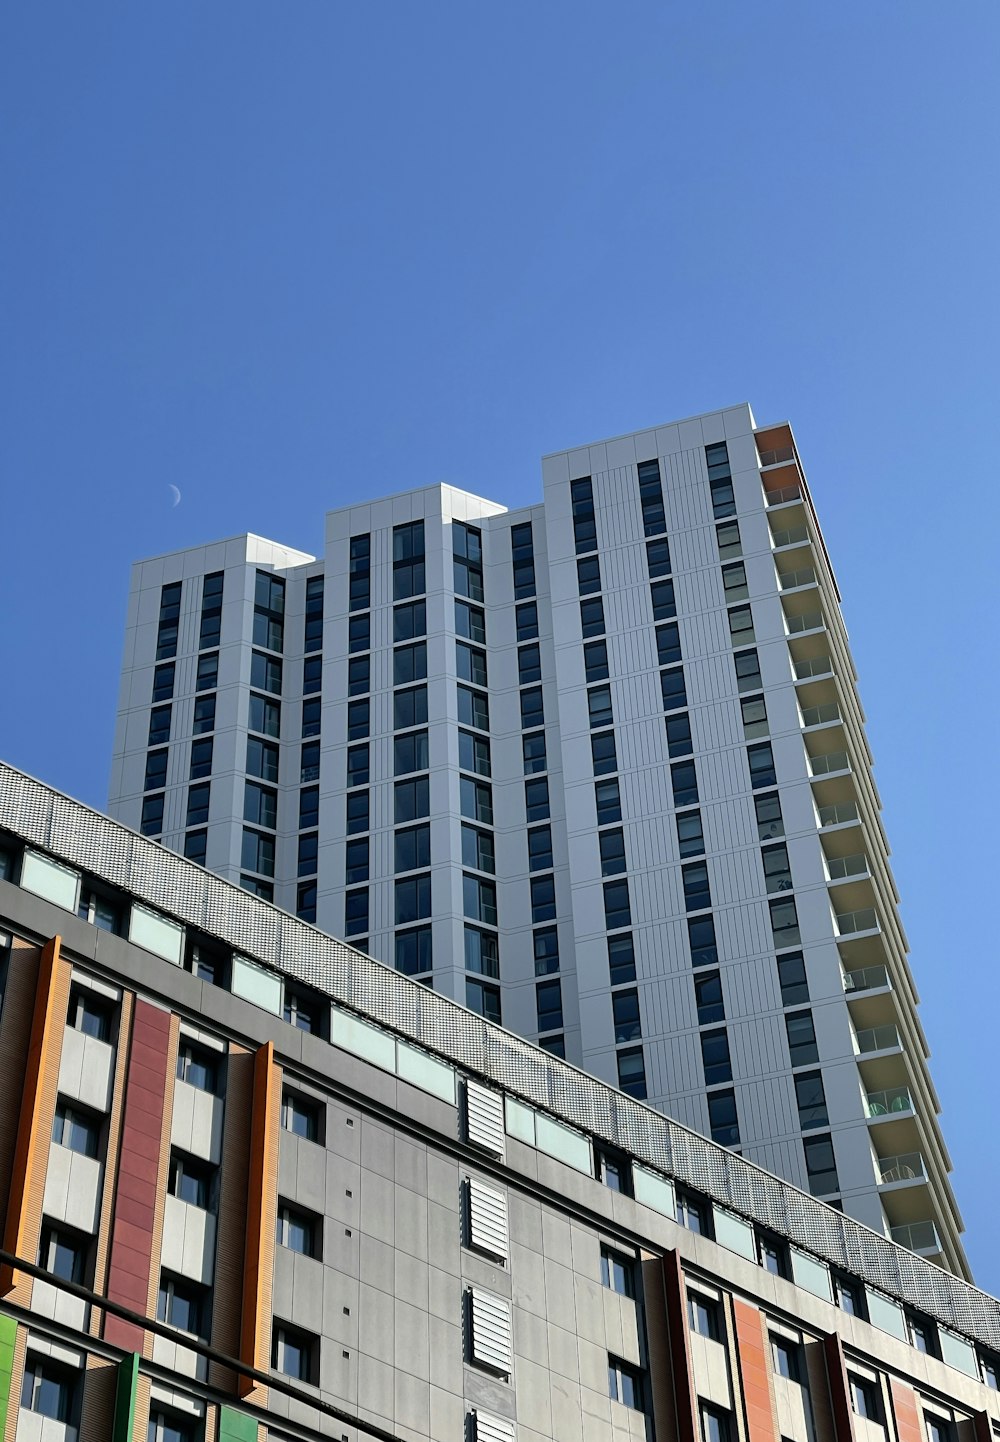 a tall building with multicolored windows against a blue sky